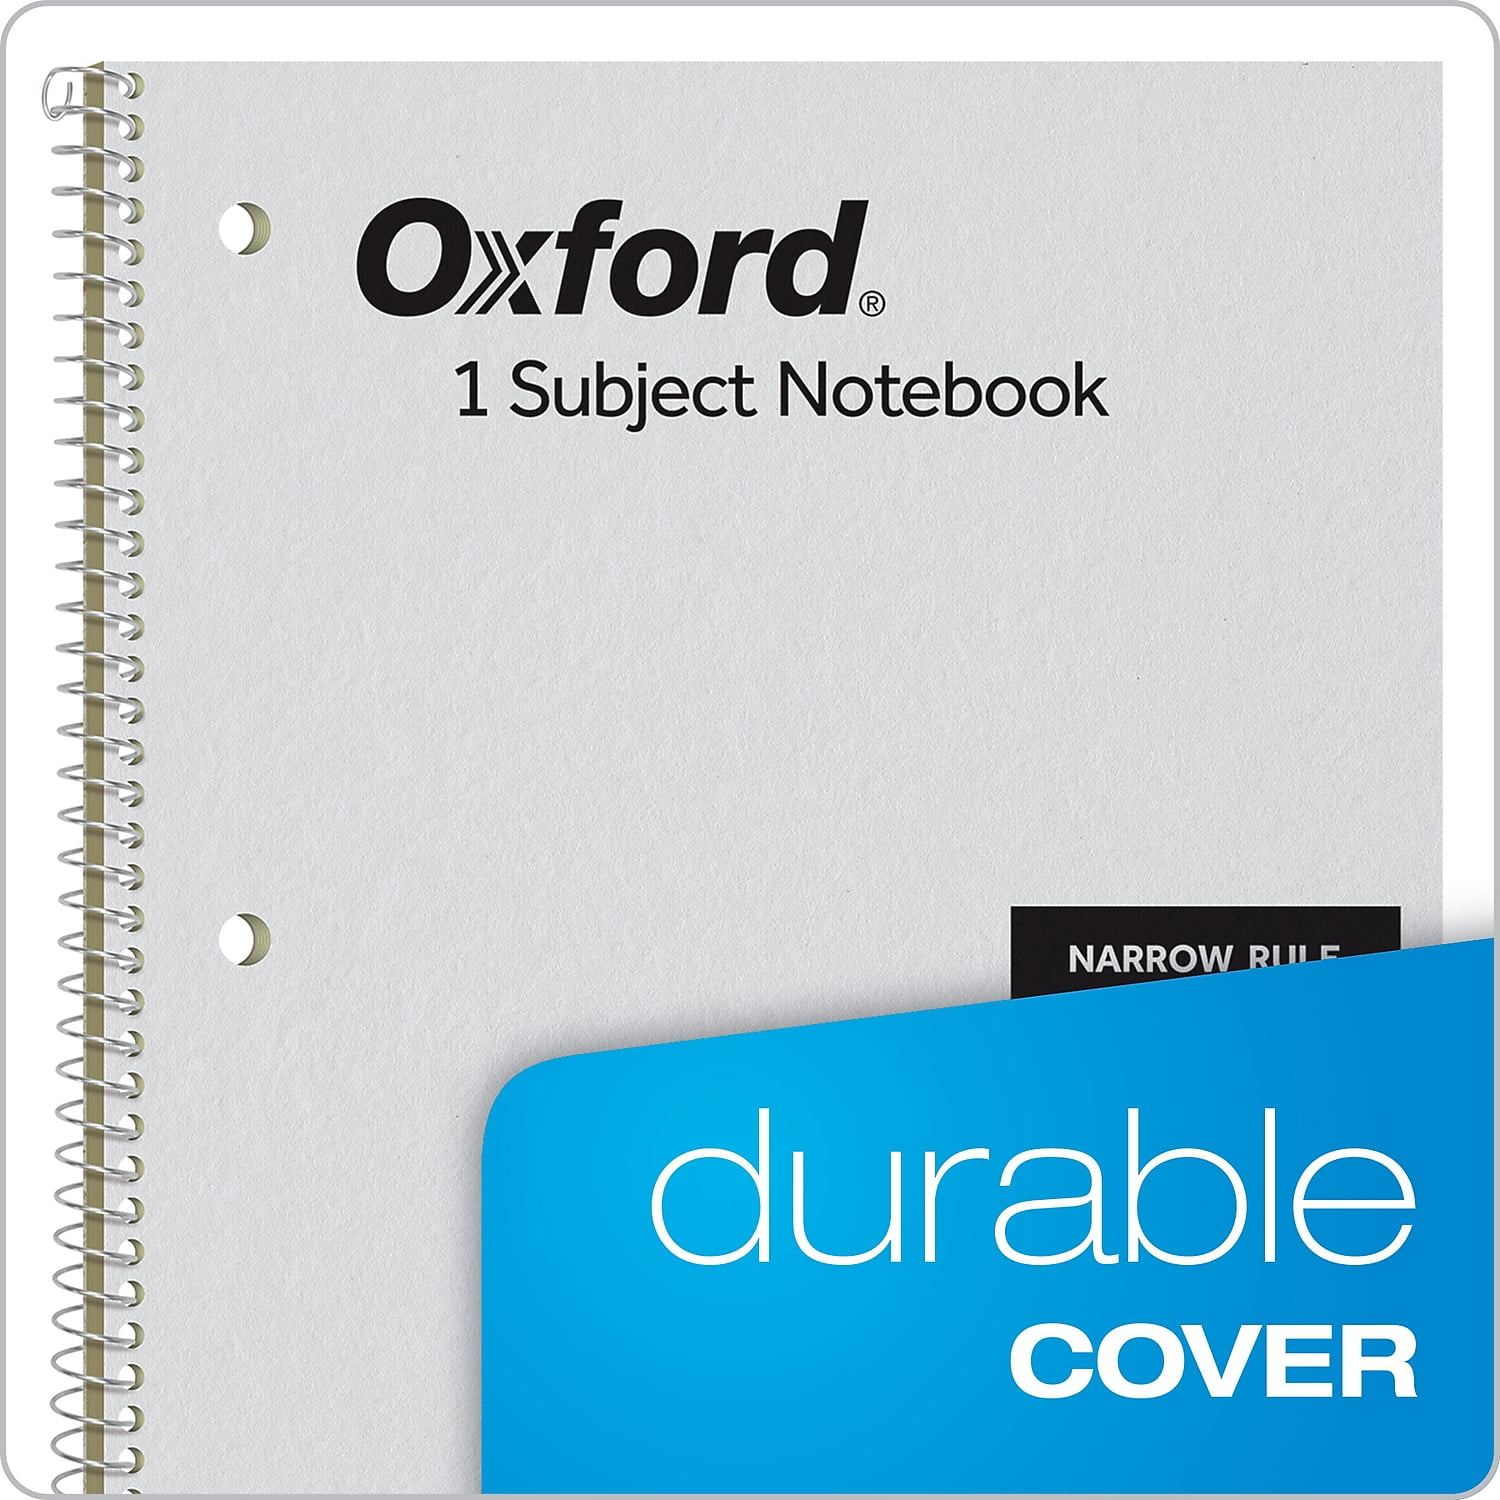 Oxford International A4+ Hardback Wirebound Notebook, Narrow Ruled with  Margin and Perforated, 80 Page, 1 Notebook